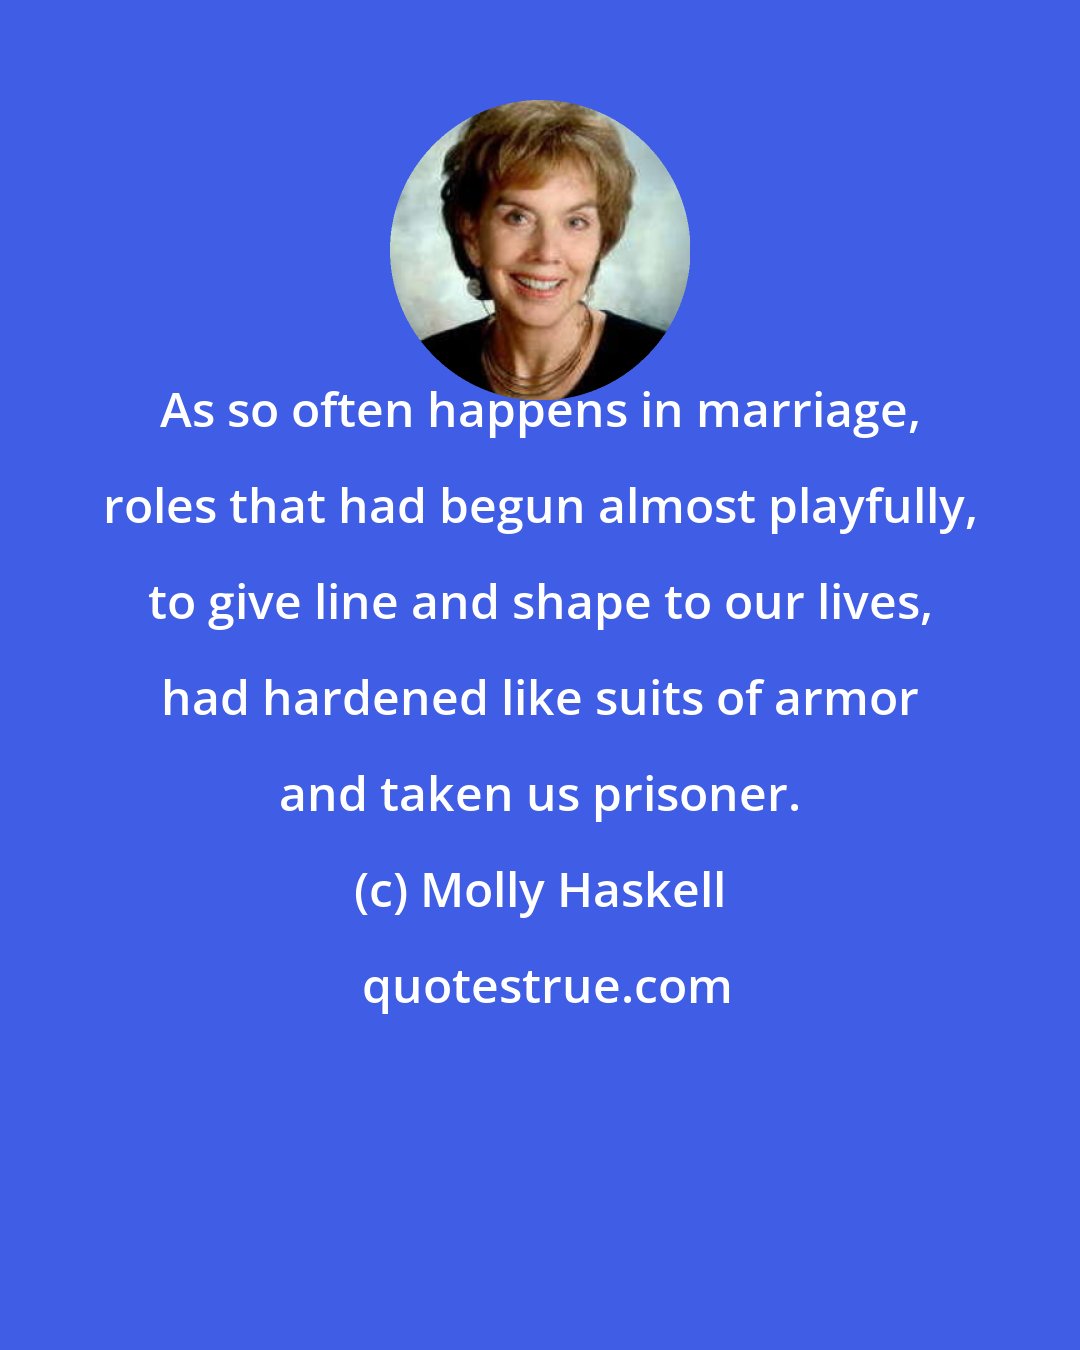 Molly Haskell: As so often happens in marriage, roles that had begun almost playfully, to give line and shape to our lives, had hardened like suits of armor and taken us prisoner.